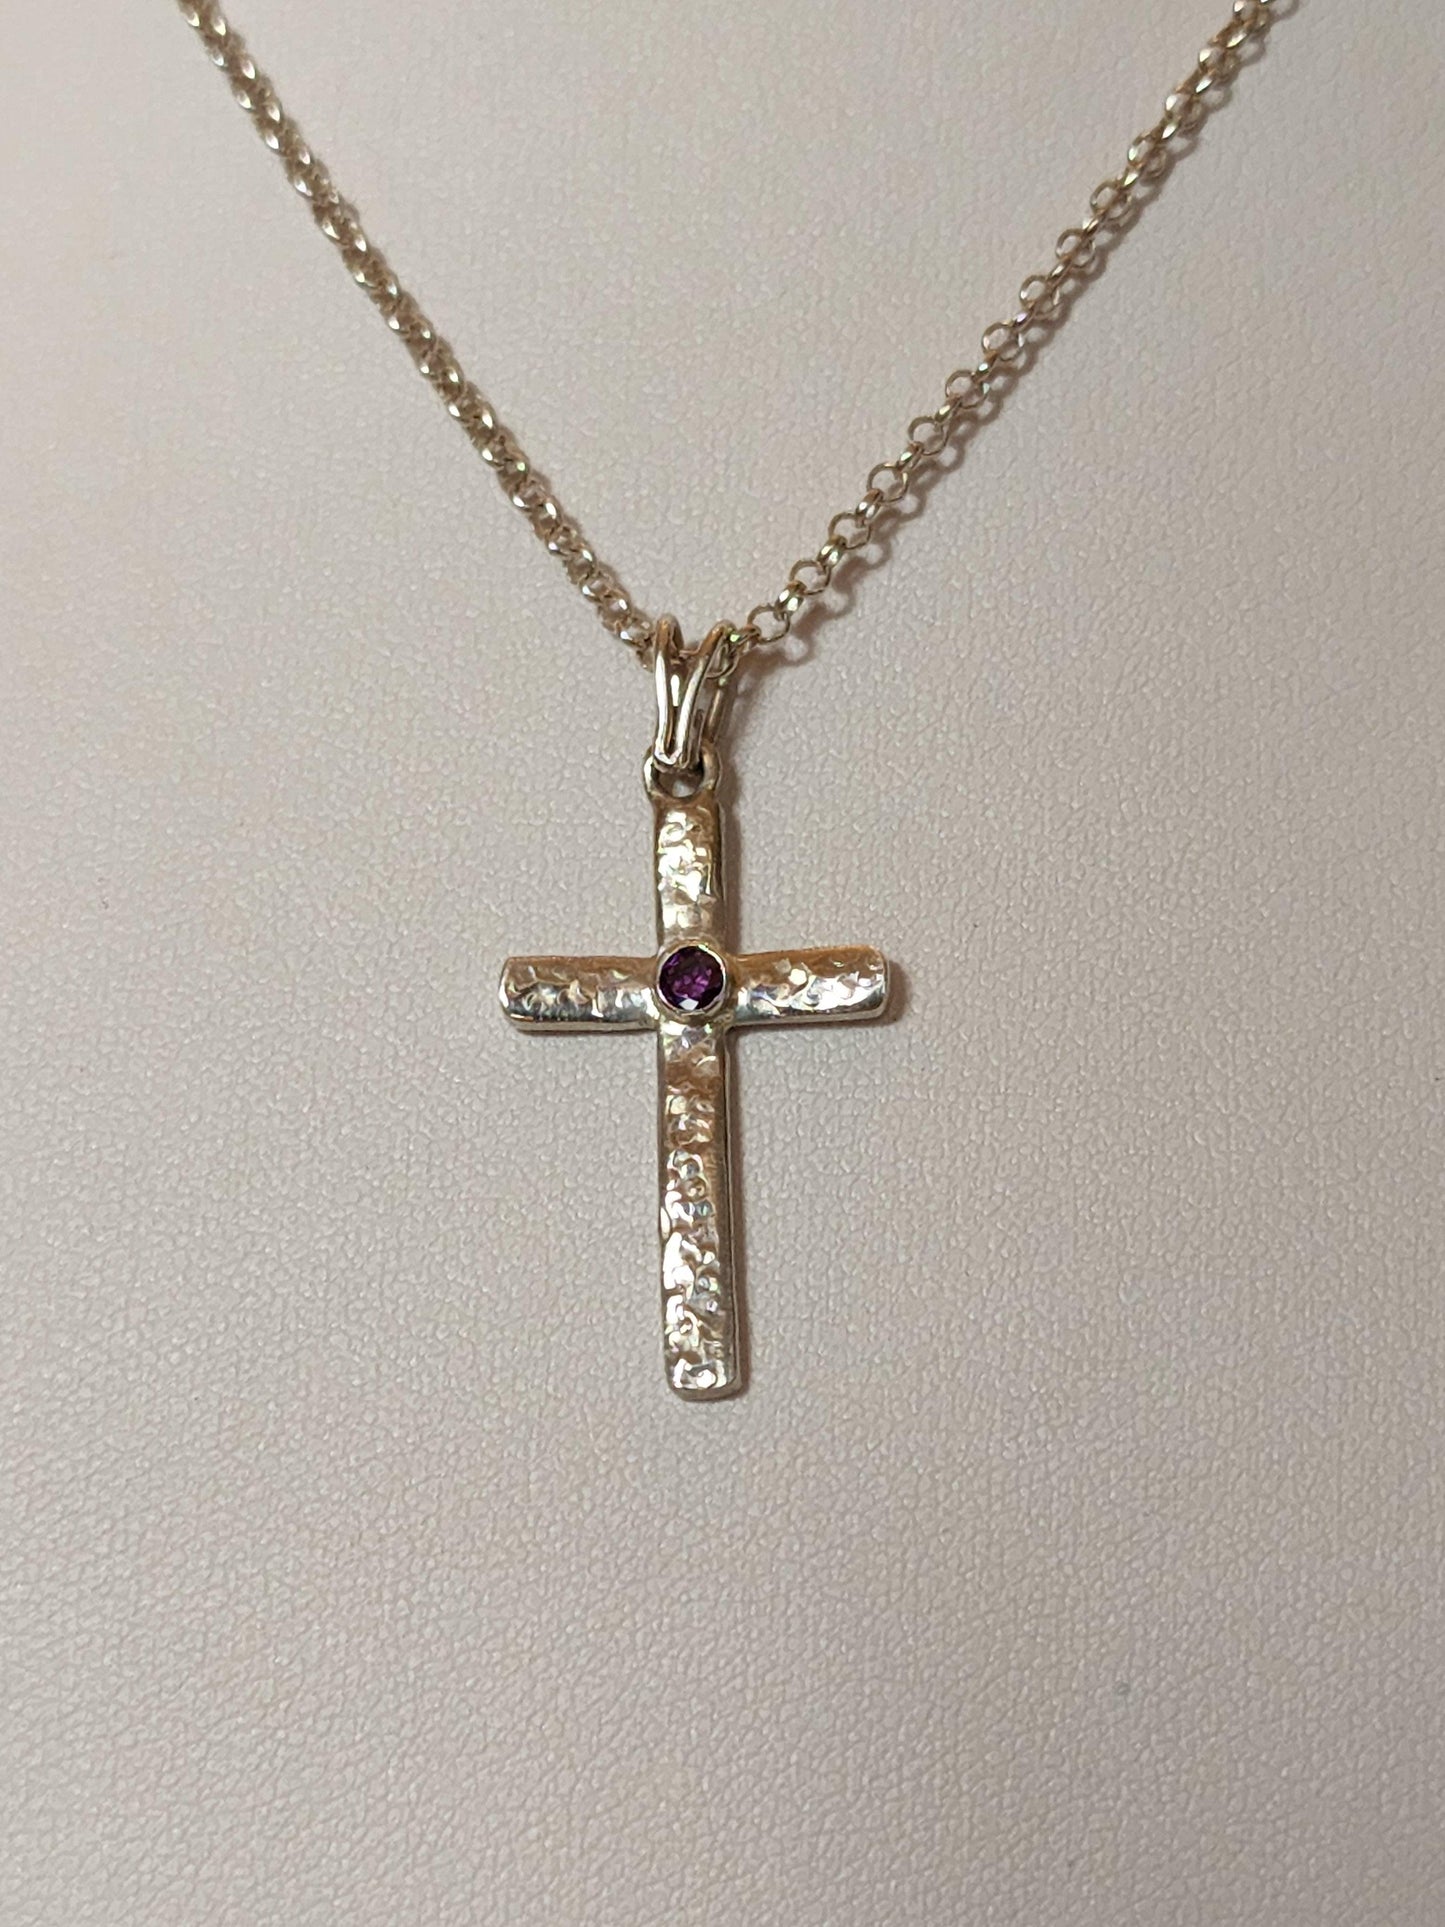 Handmade Sterling Silver and Swarovski Crystal Cross Necklace - Gilded Heart Designs